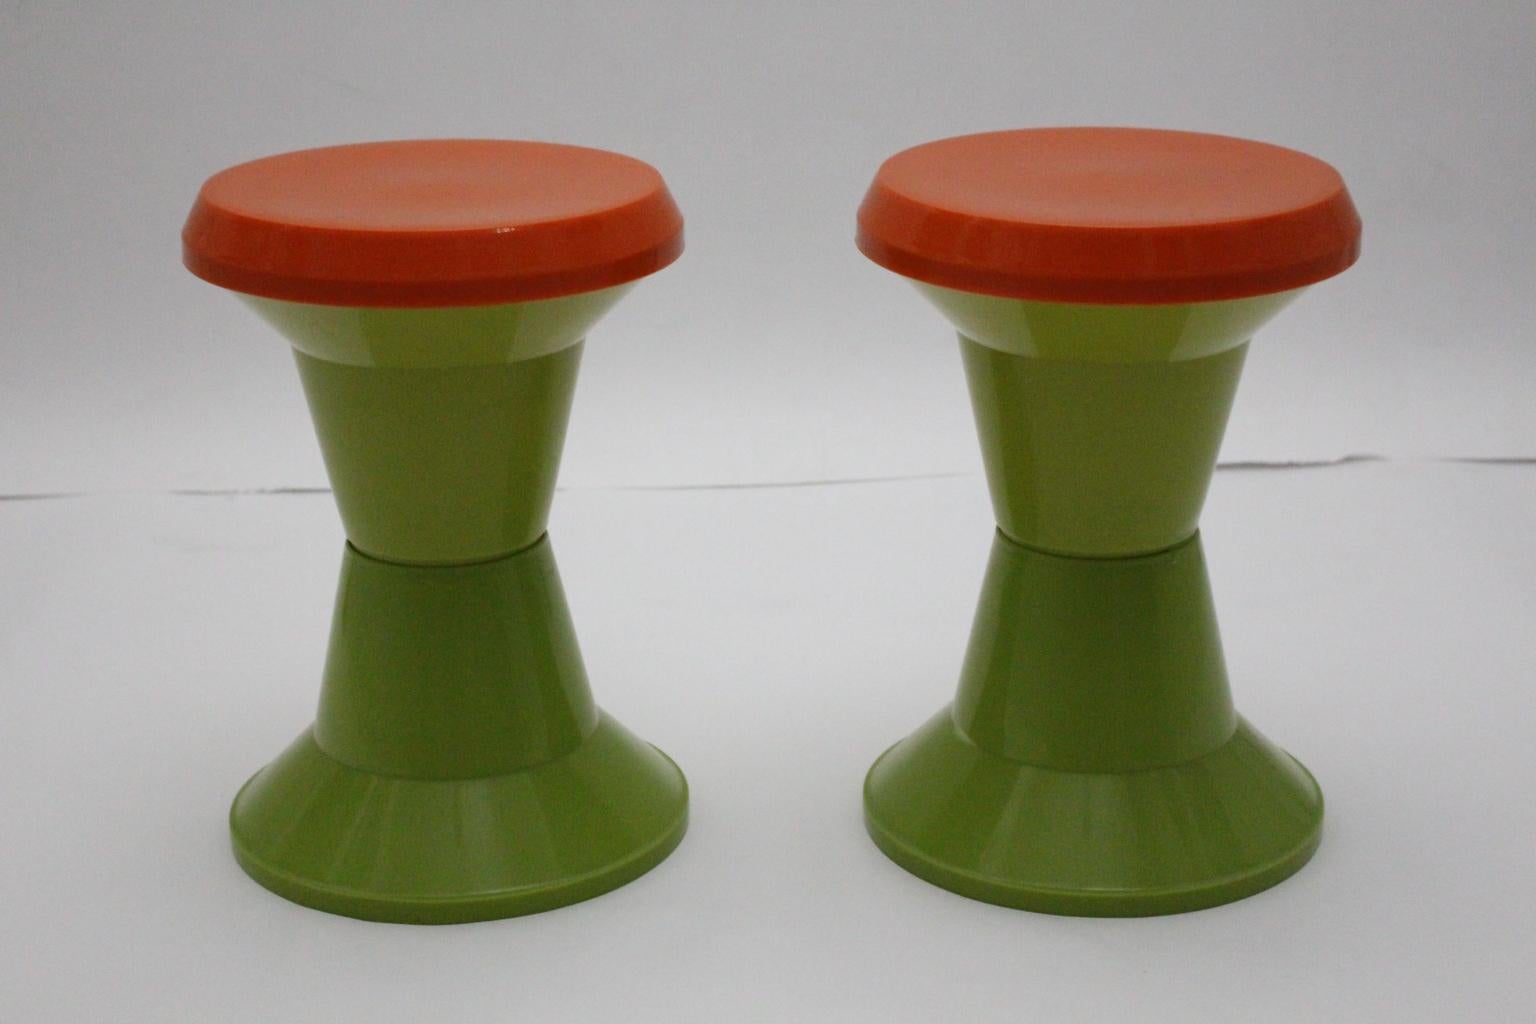 Space age set two ( 2 ) stools in the colors apple green and orange from plastic 1970s Italy.
Stamped underneath Giganplast Italy.
Very good vintage condition
approx. measures:
Diameter 30.5 cm
Height: 43 cm